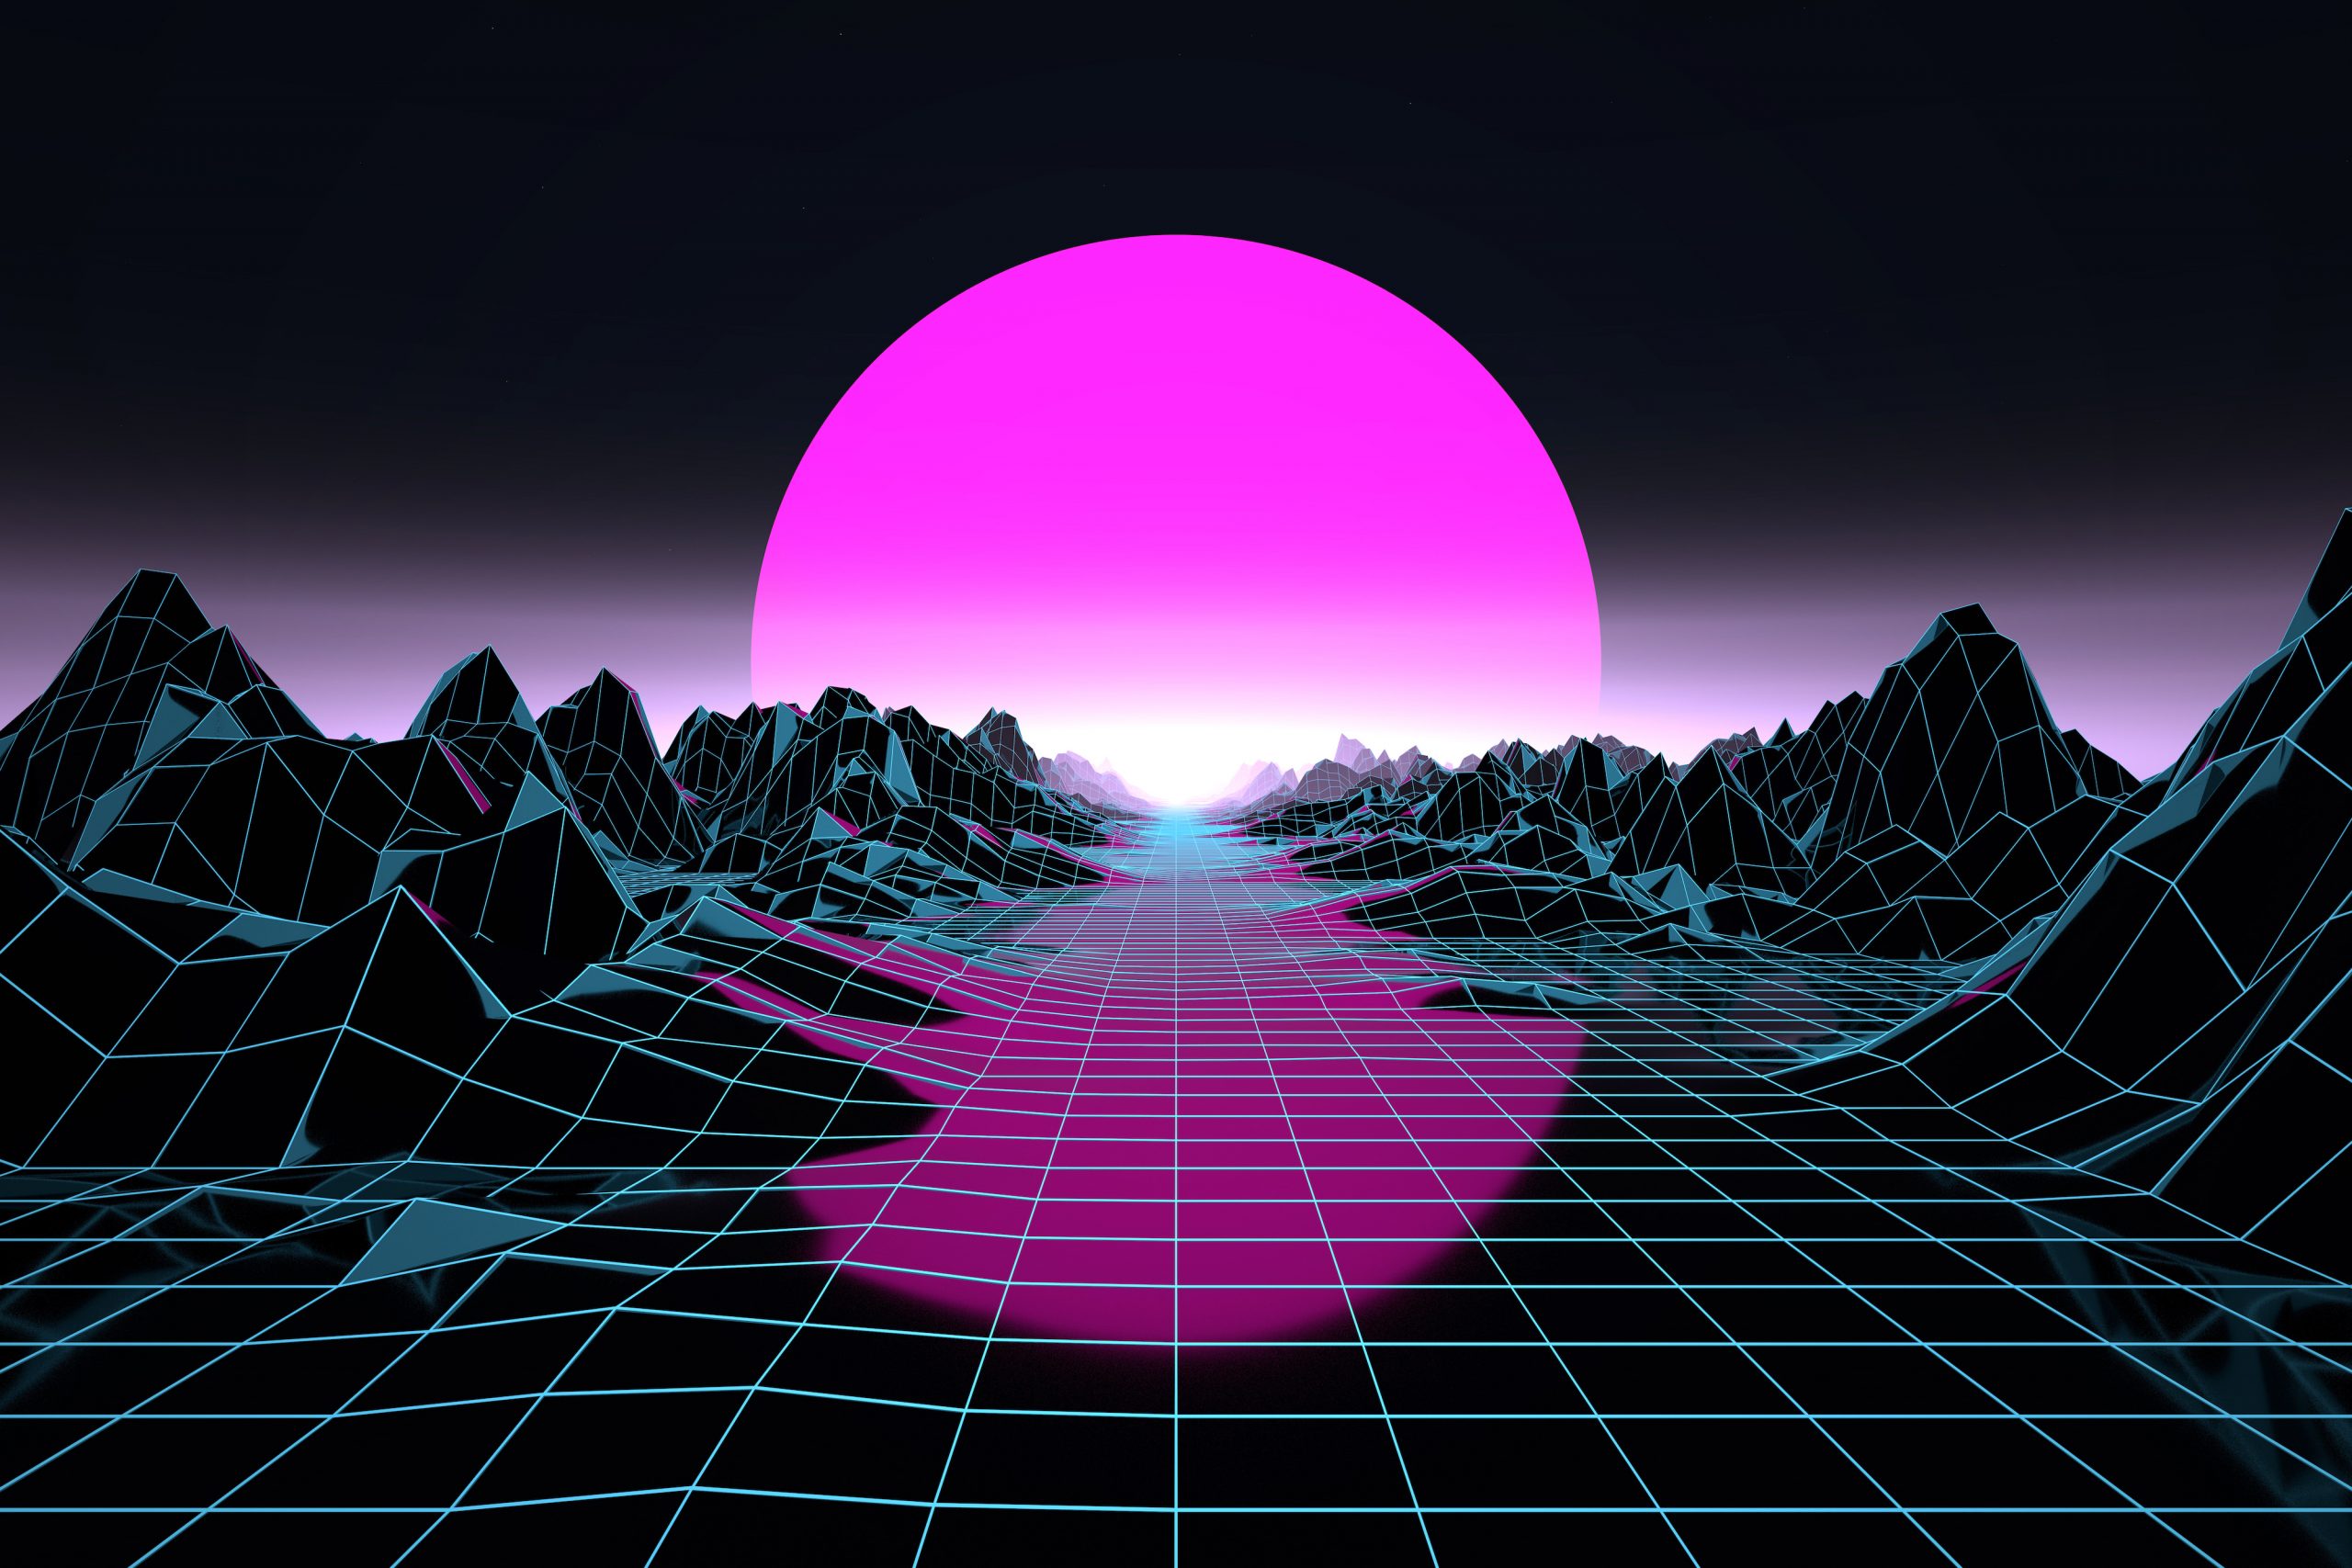 Futuristic digital render in cyber landscape with big low sun. Synthwave style